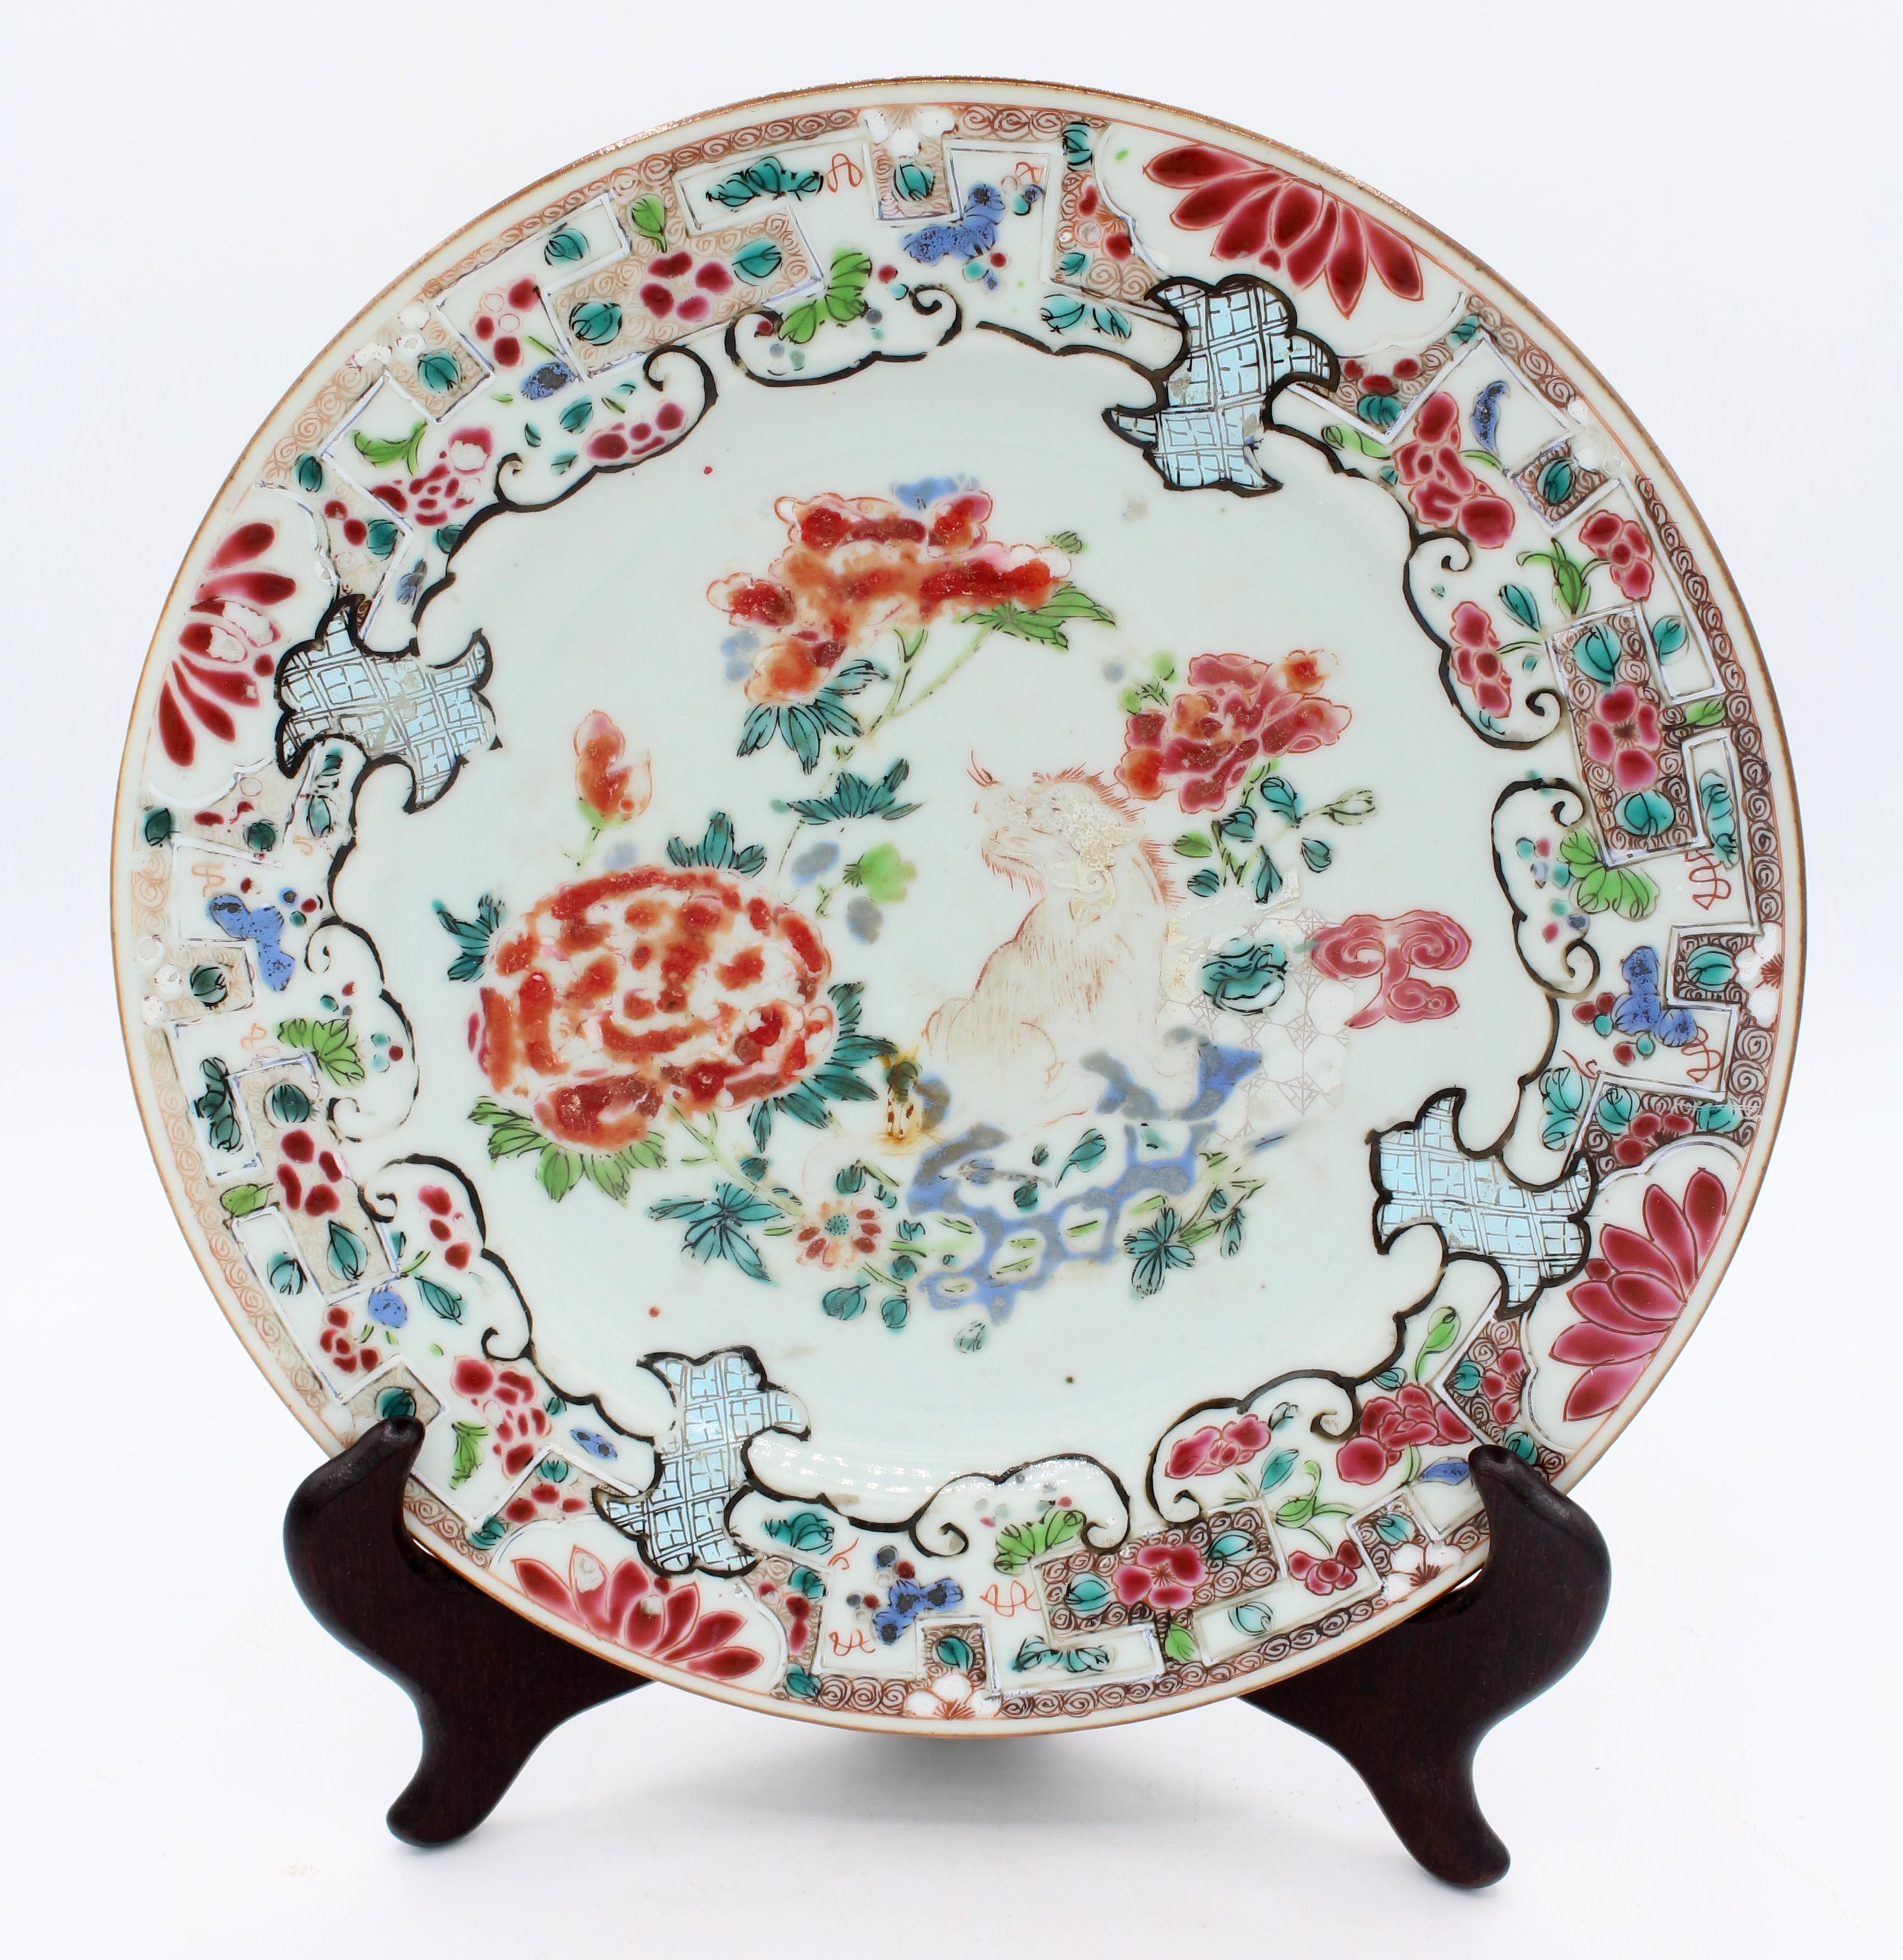 A Pair of Yongzheng Period Famille Rose Plates, Chinese, 1722-1735 In Good Condition For Sale In Chapel Hill, NC